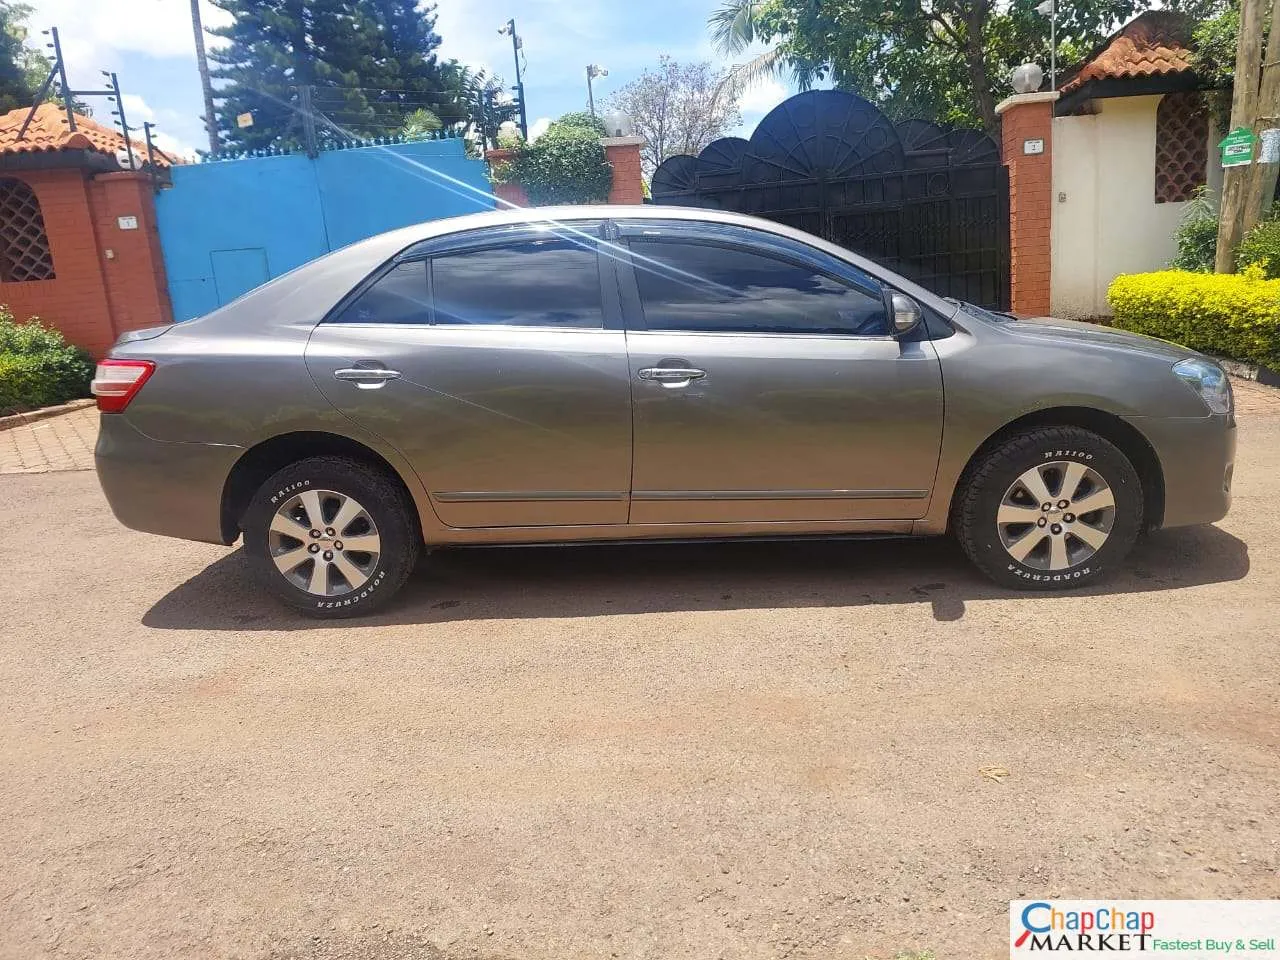 Cars Cars For Sale/Vehicles-Toyota PREMIO New Shape Pay 30% Deposit Trade in Ok EXCLUSIVE 9